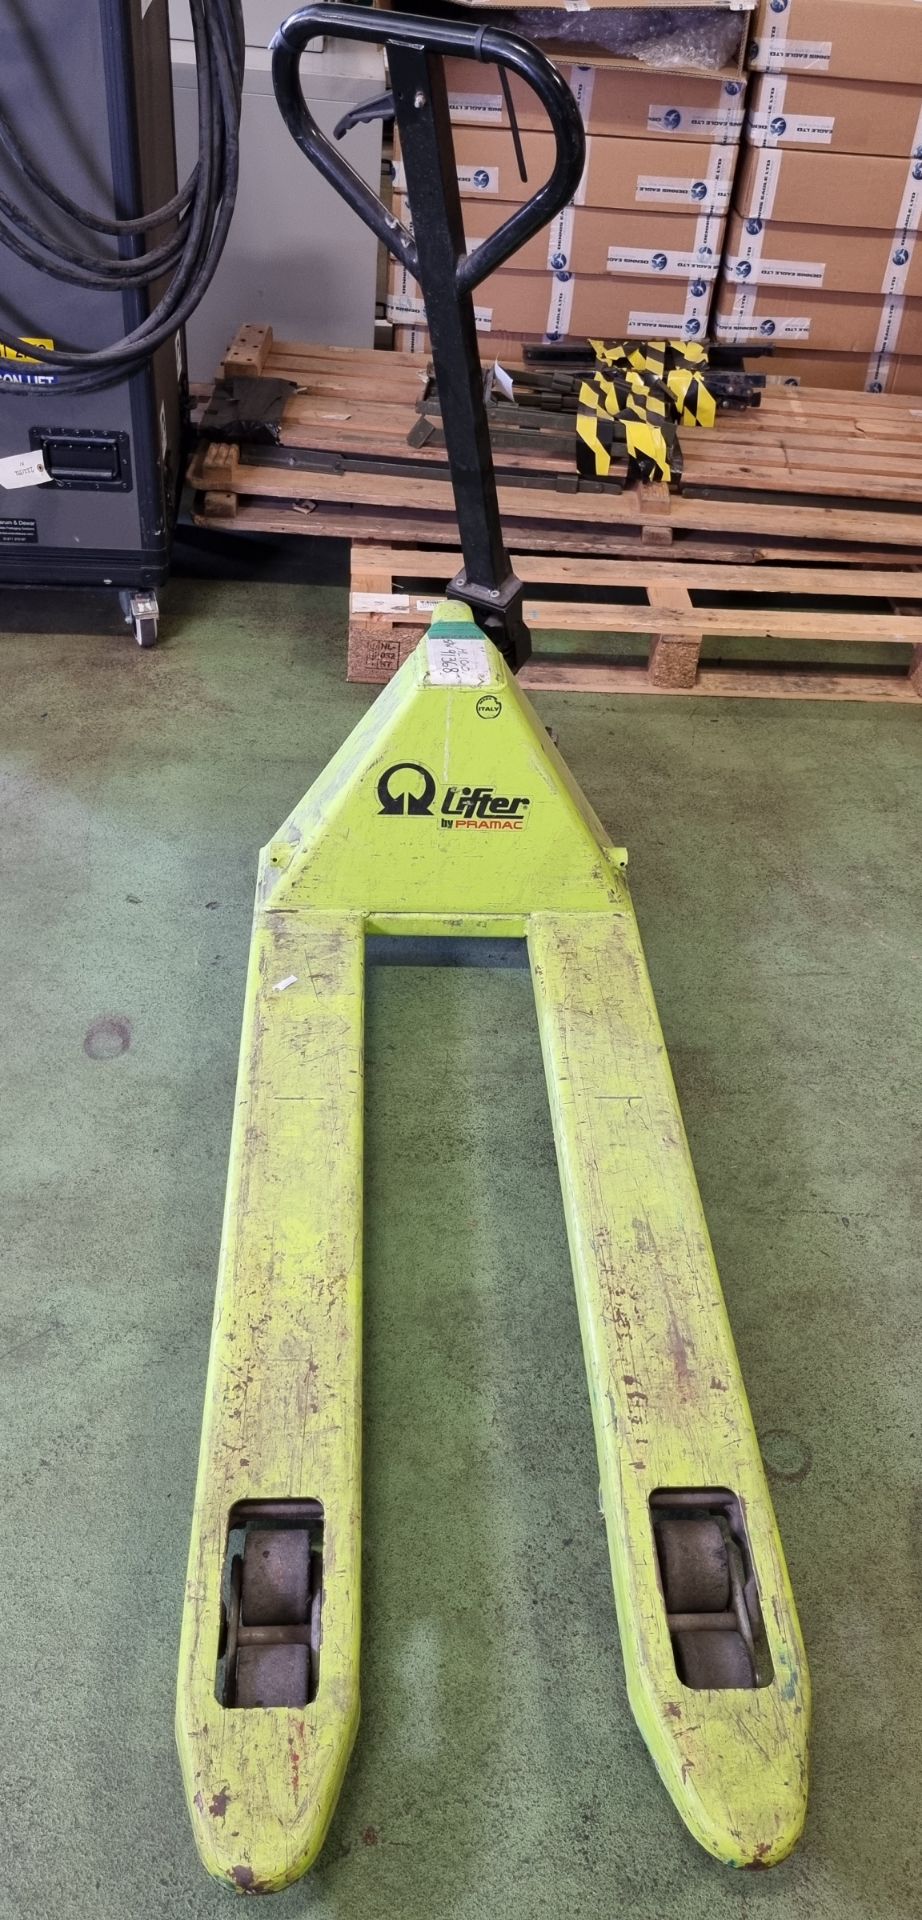 Primac Lifter hand pallet truck - SPARES AND REPAIRS - misaligned and missing a bolt - Bild 2 aus 3